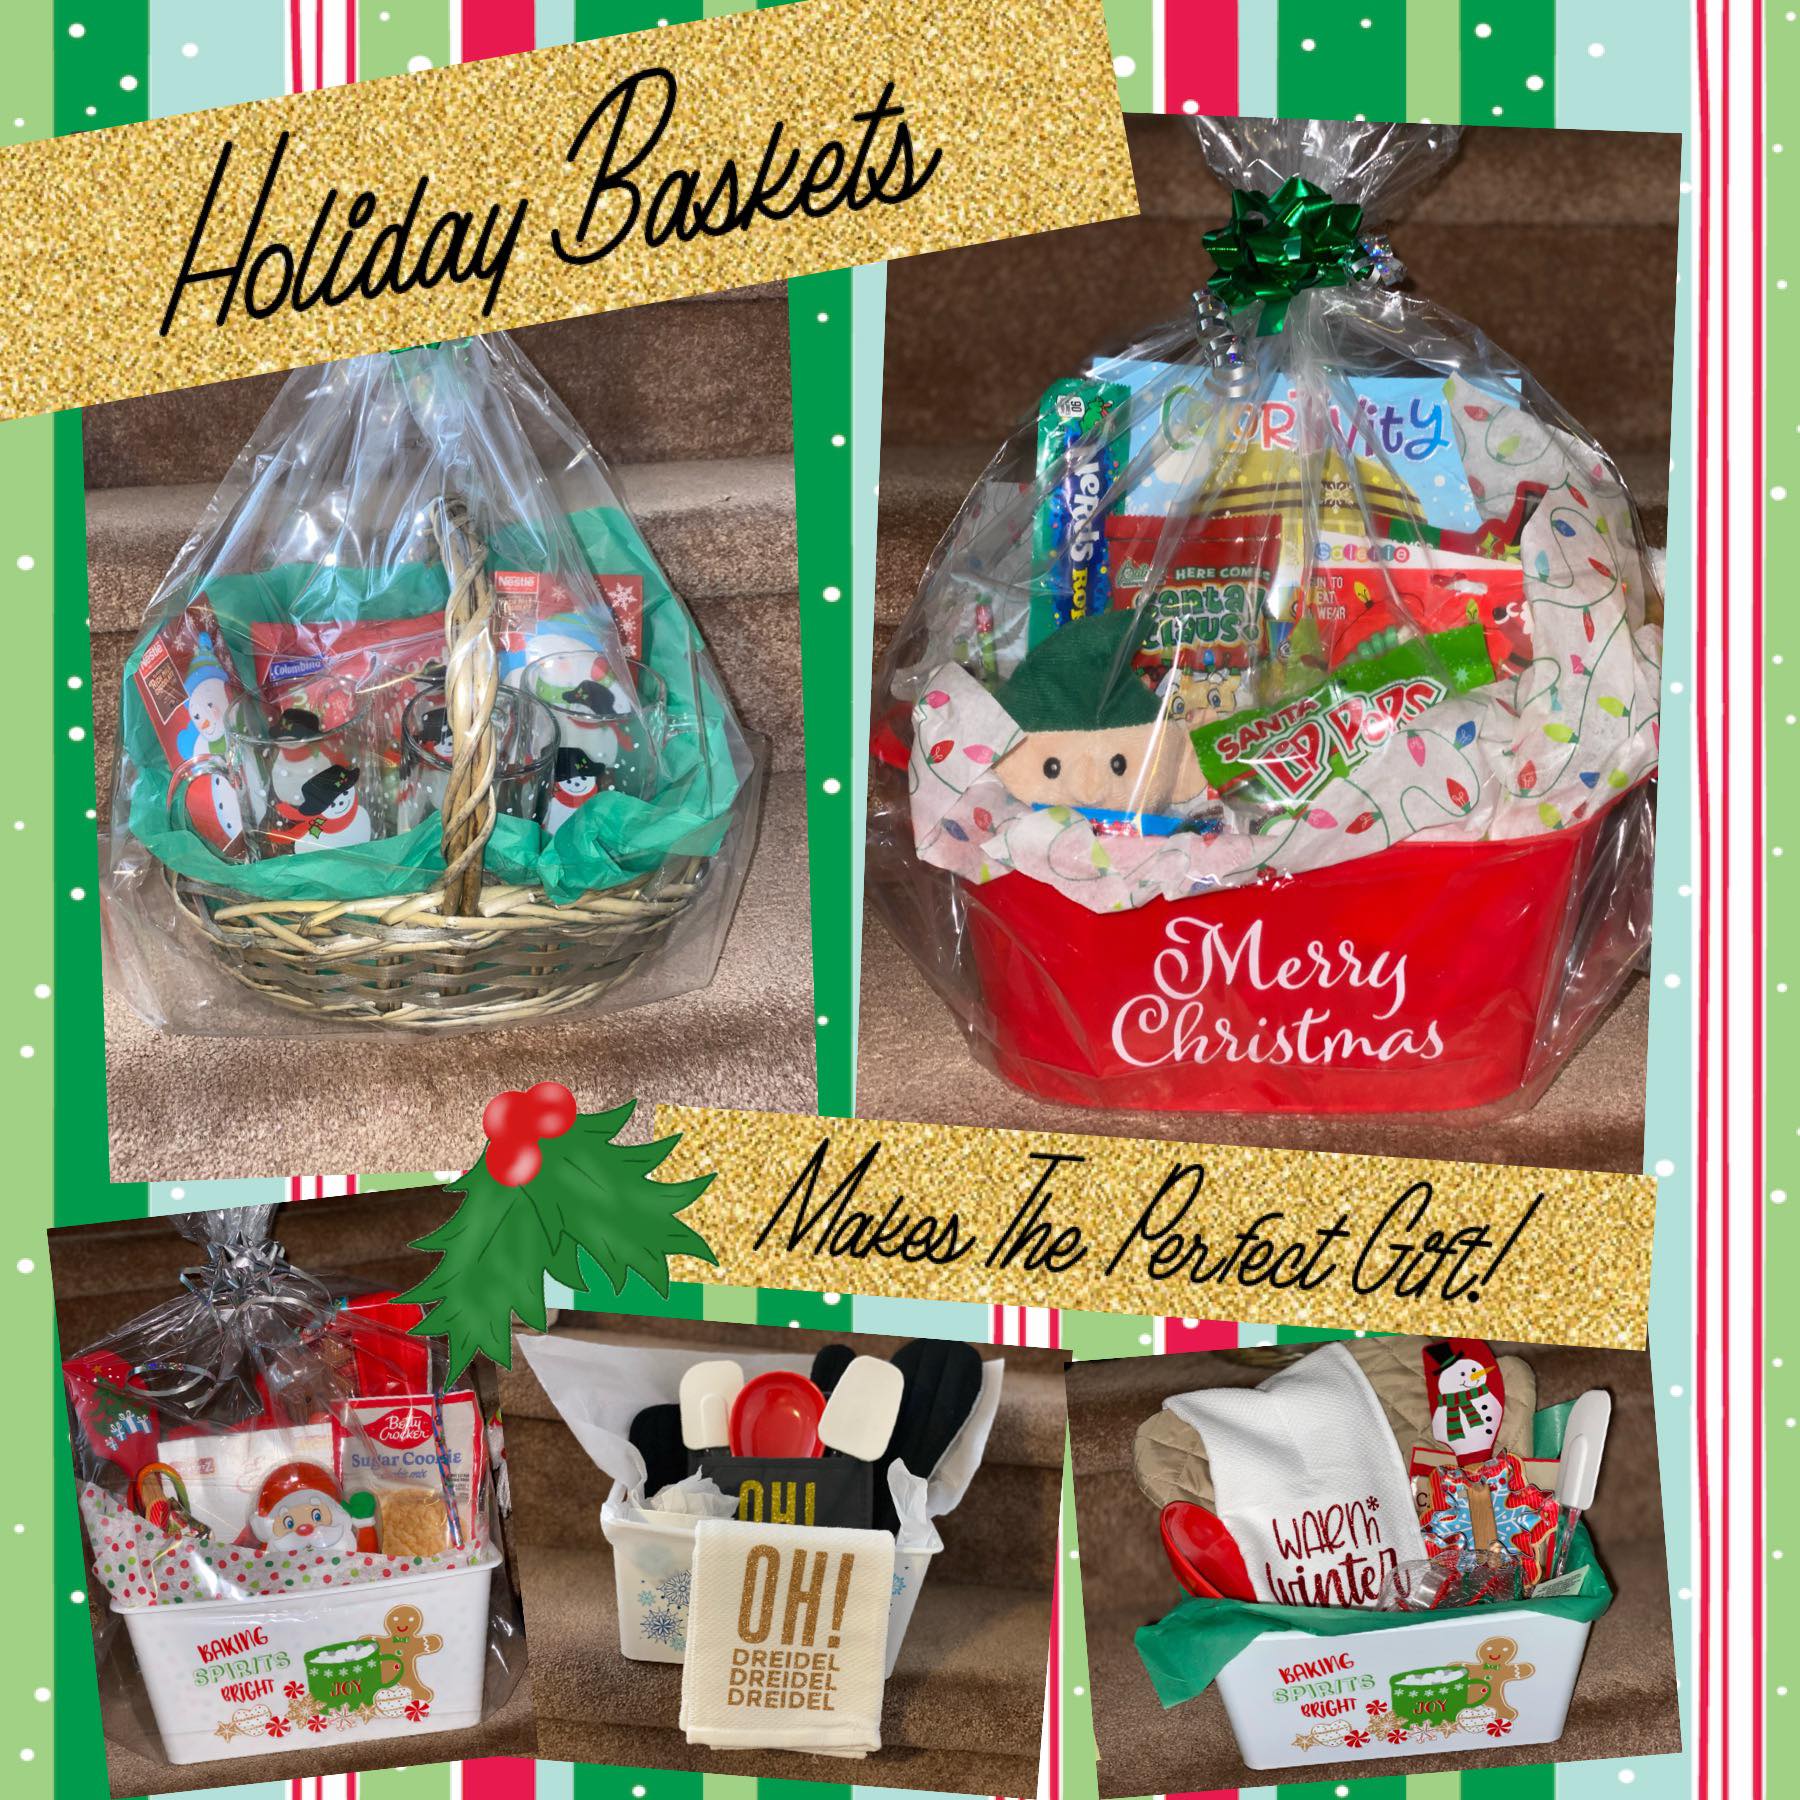 Stephy’s Sassy Creations Holiday Gift Baskets